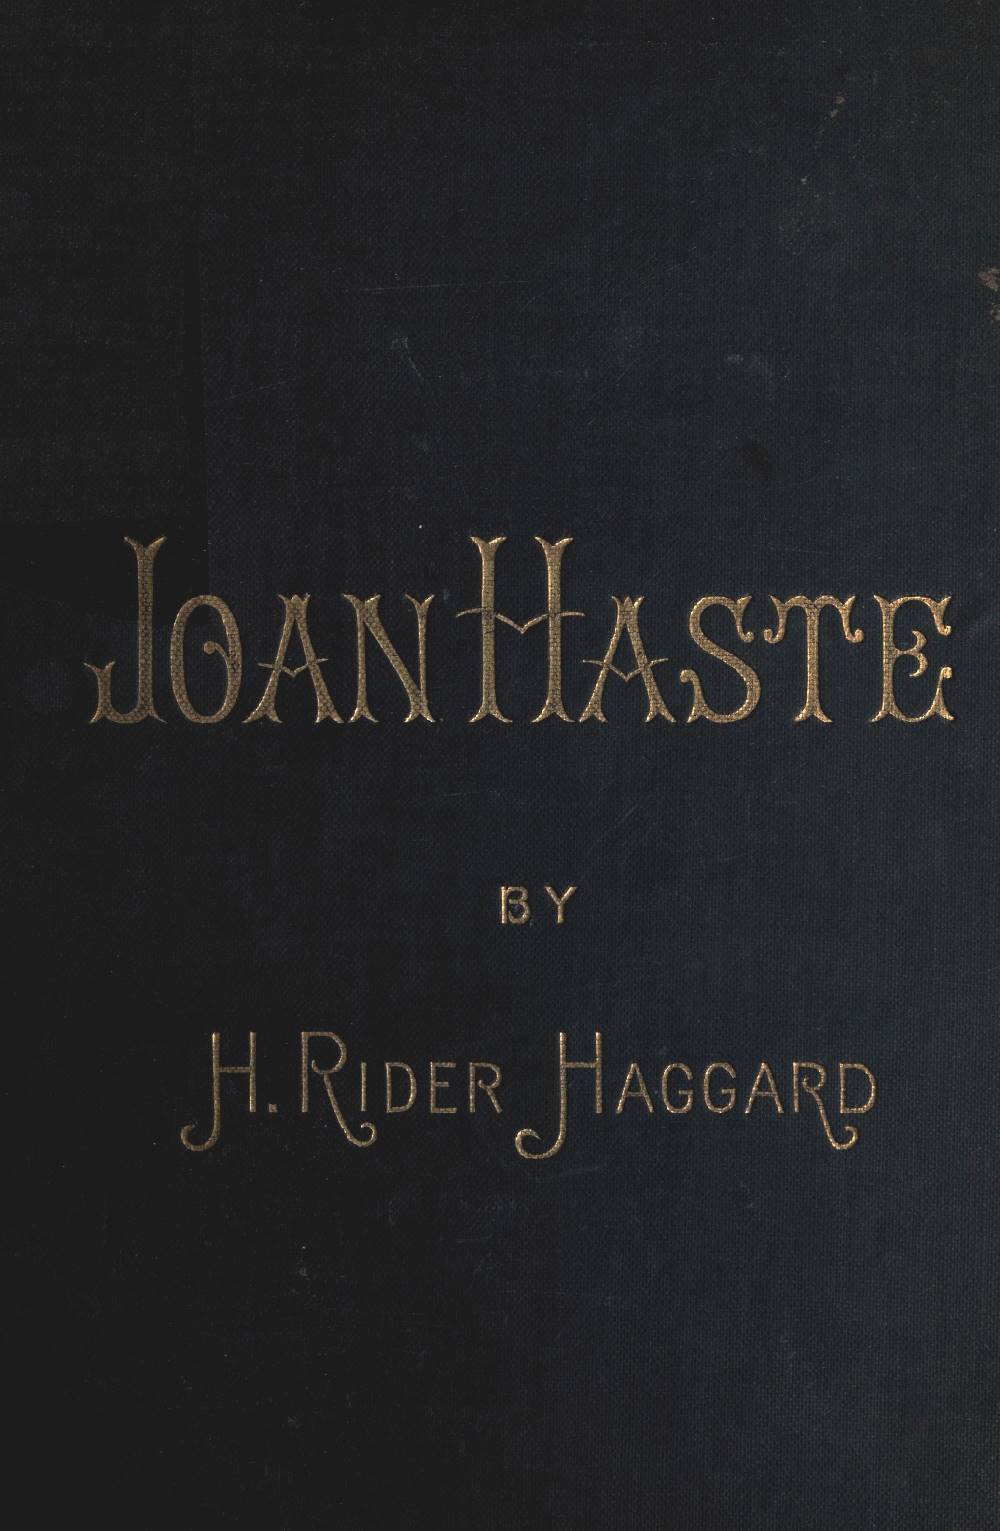 The Project Gutenberg eBook of Joan Haste, by H picture